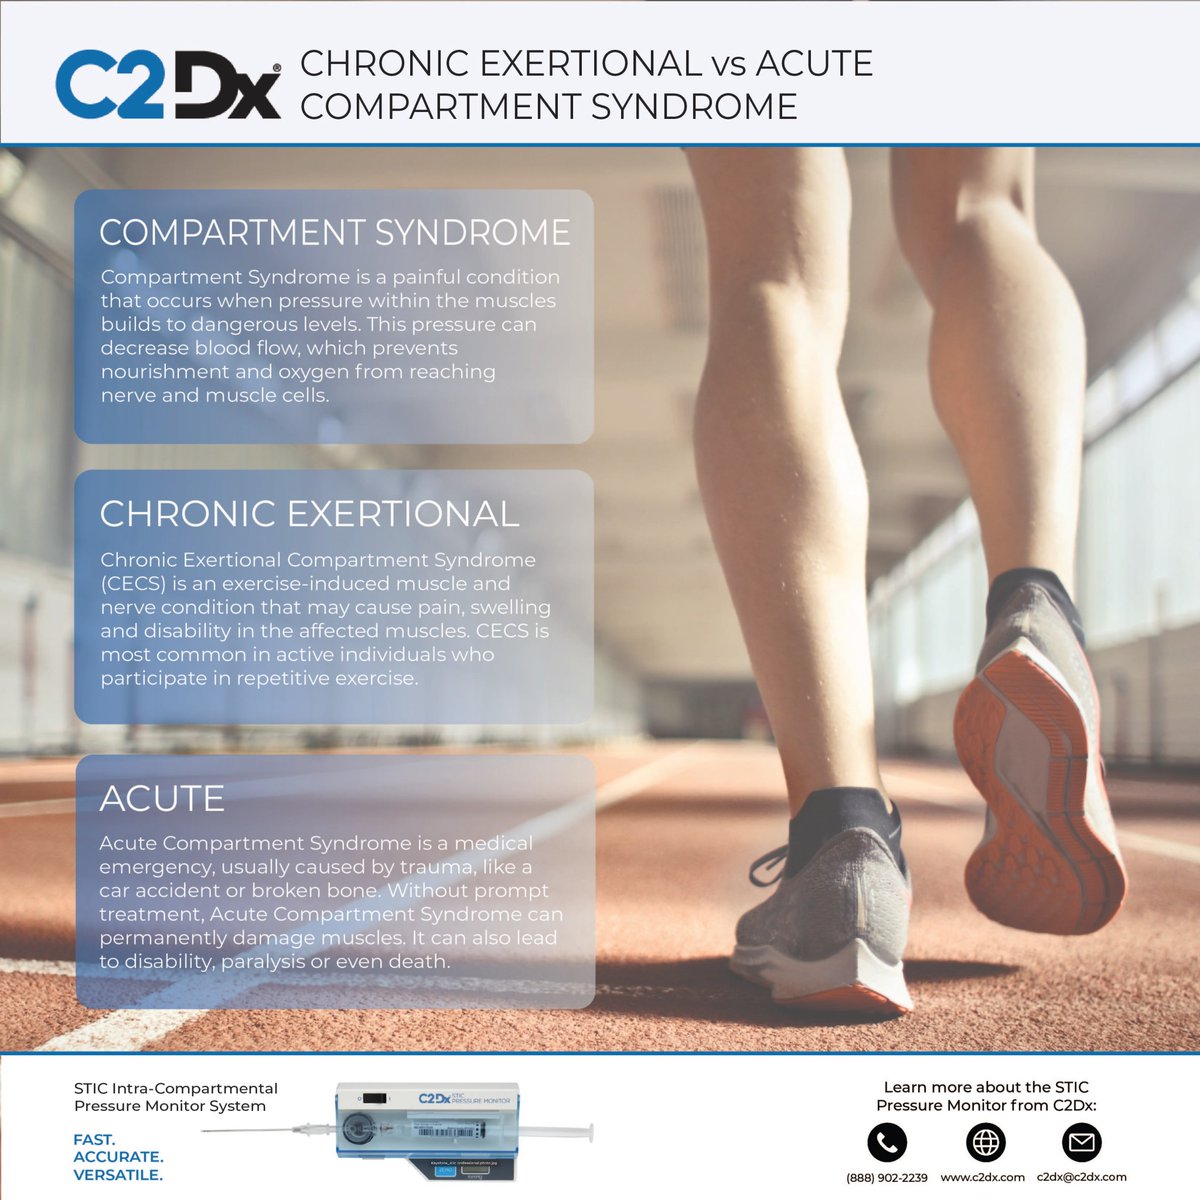 Use the STIC Pressure Monitor from C2Dx to aid in the diagnosis of compartment syndrome. Download the free white paper to learn the pathophysiology, diagnosis, and management: bit.ly/ACSWP

#C2Dx #CompartmentSyndrome #ChronicExertional #Acute #STIC